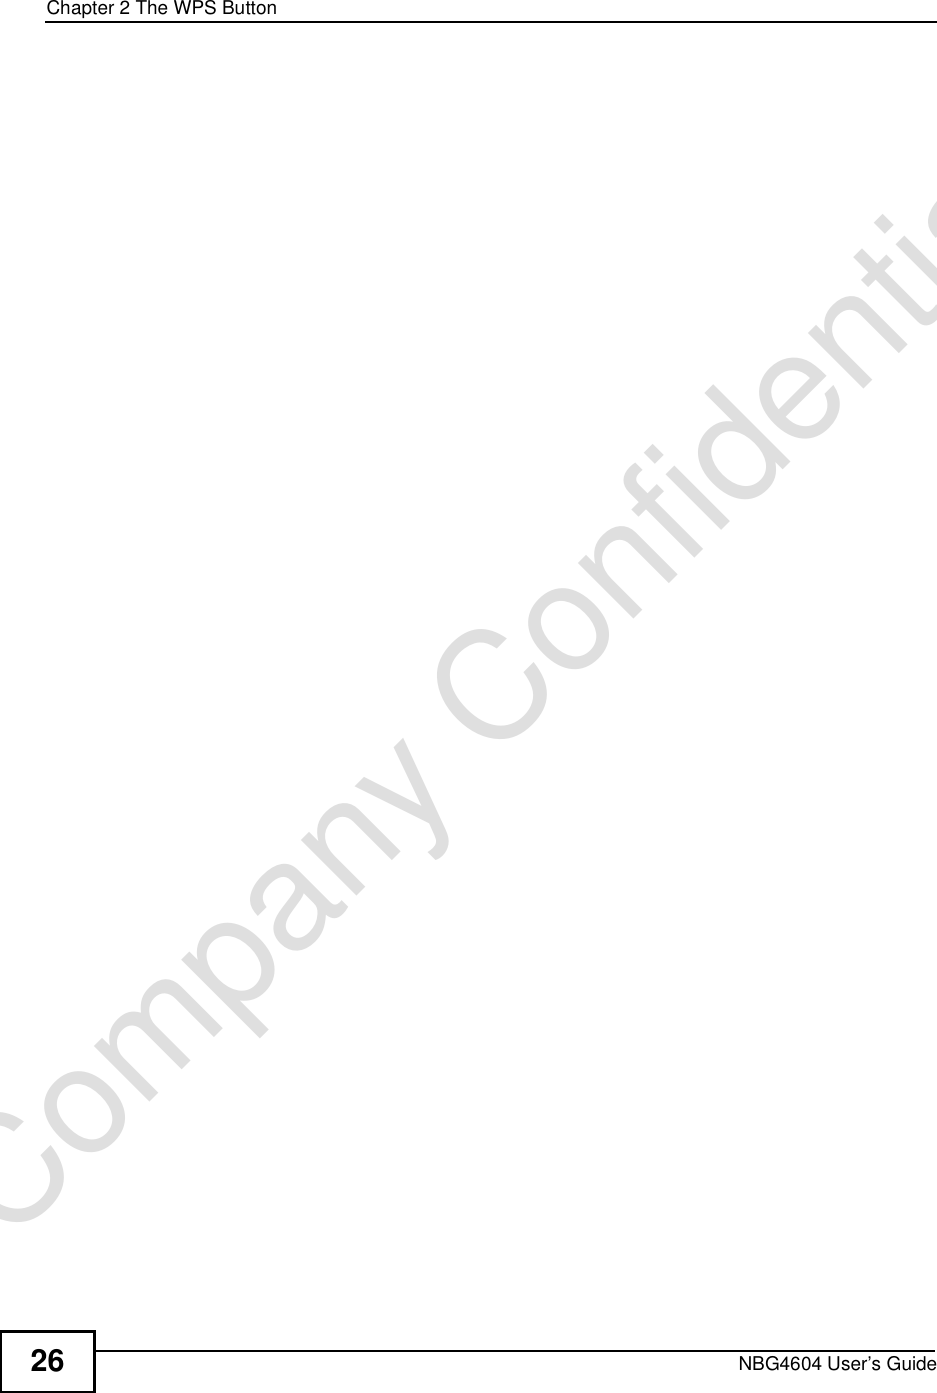 Chapter 2The WPS ButtonNBG4604 User’s Guide26Company Confidential